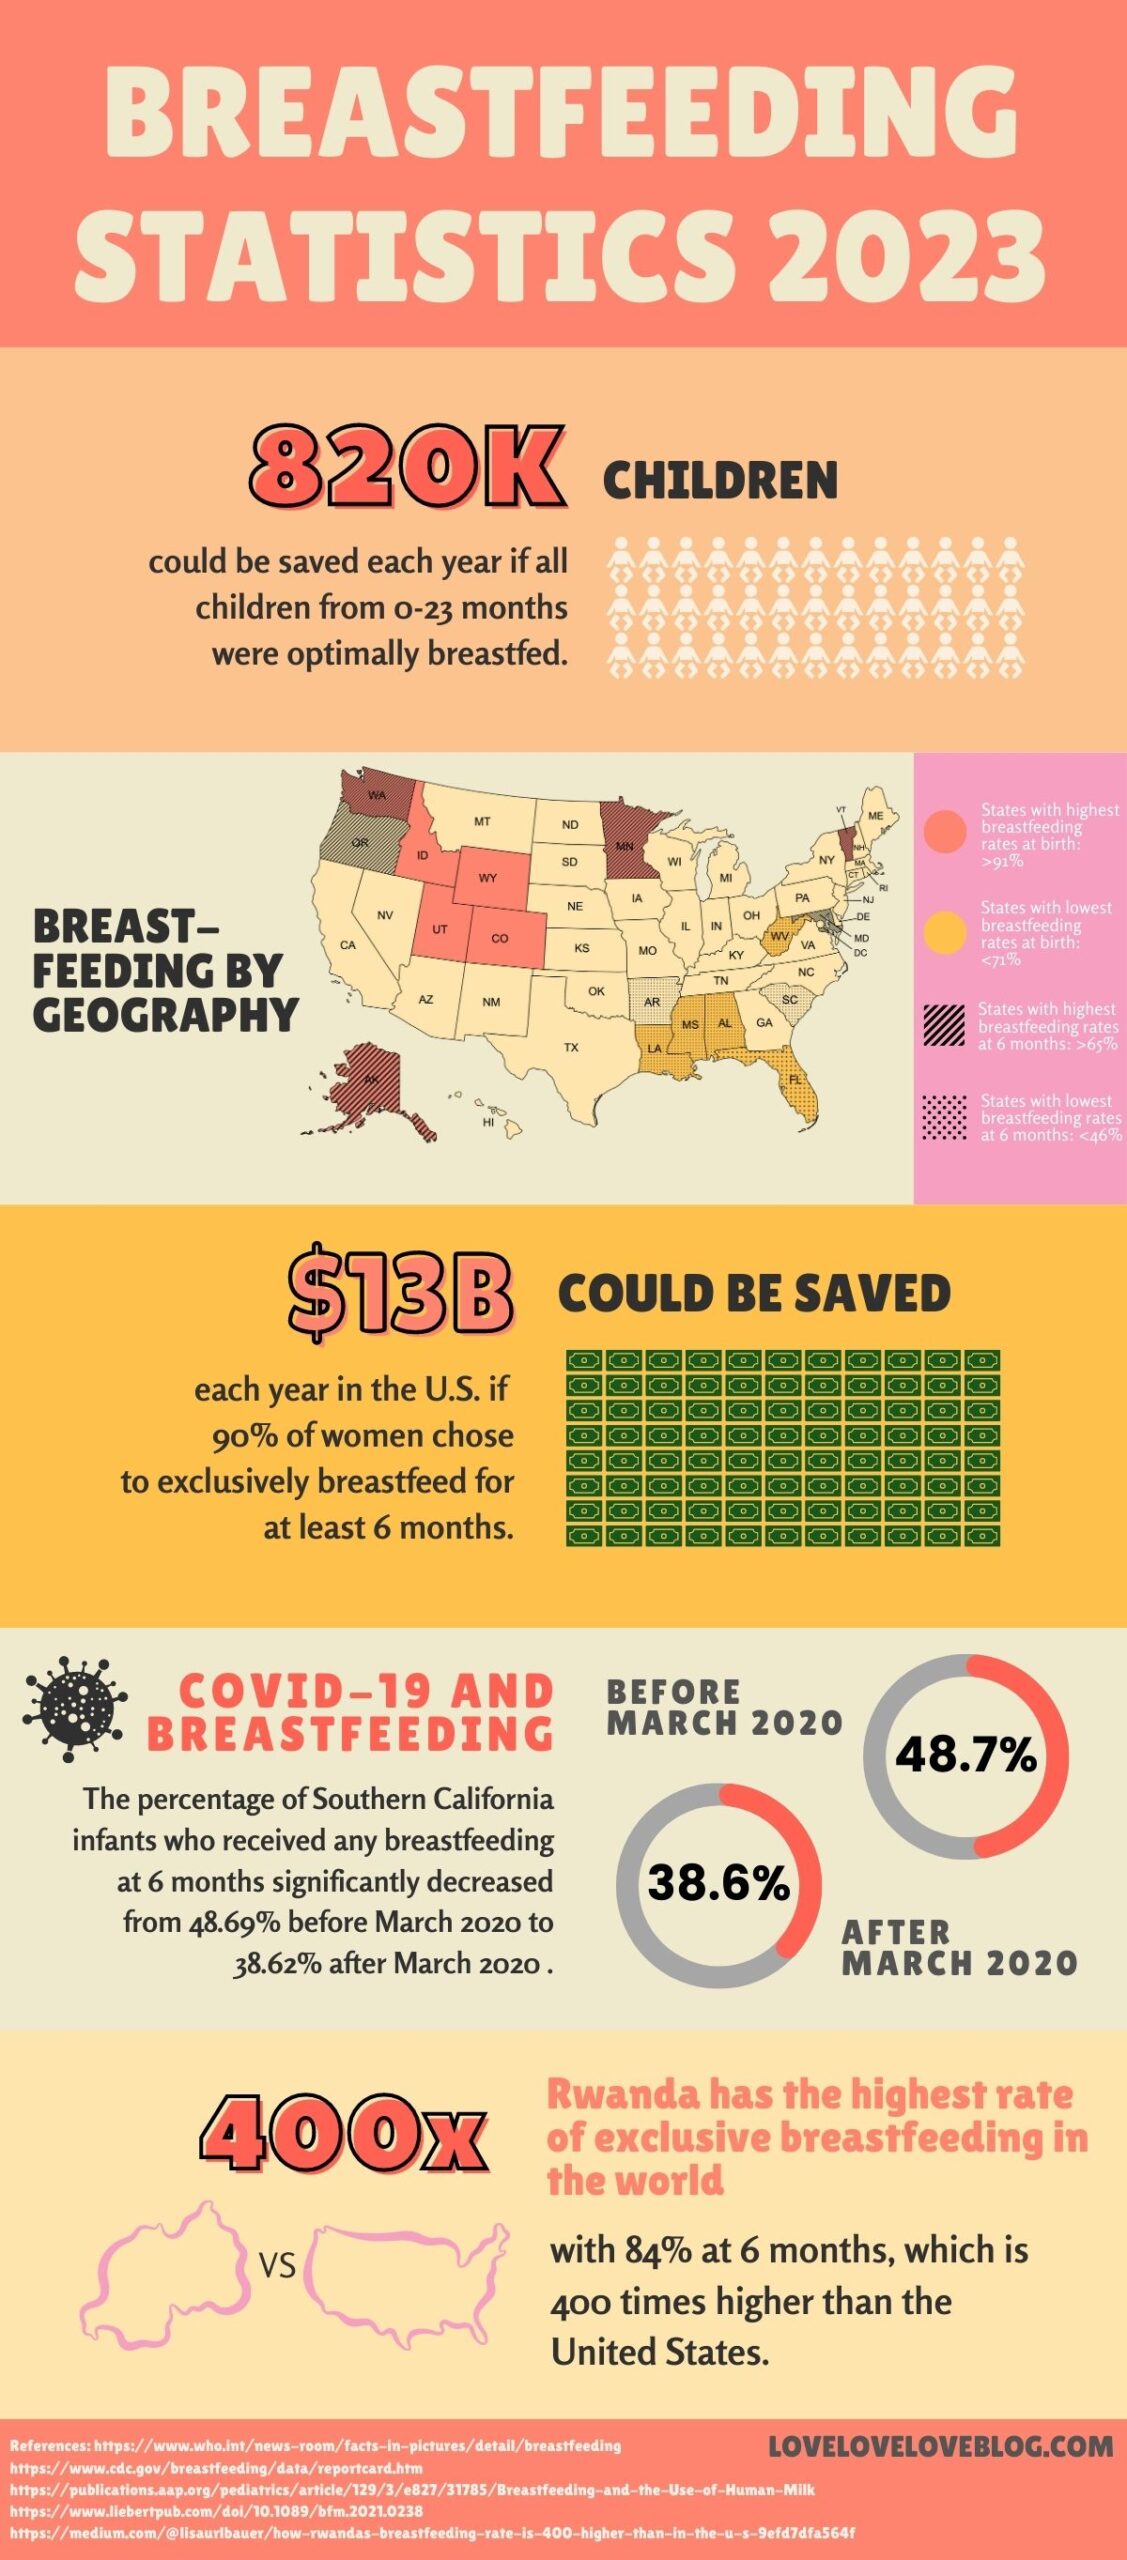 Infographic with several latest breastfeeding statistics in 2023.